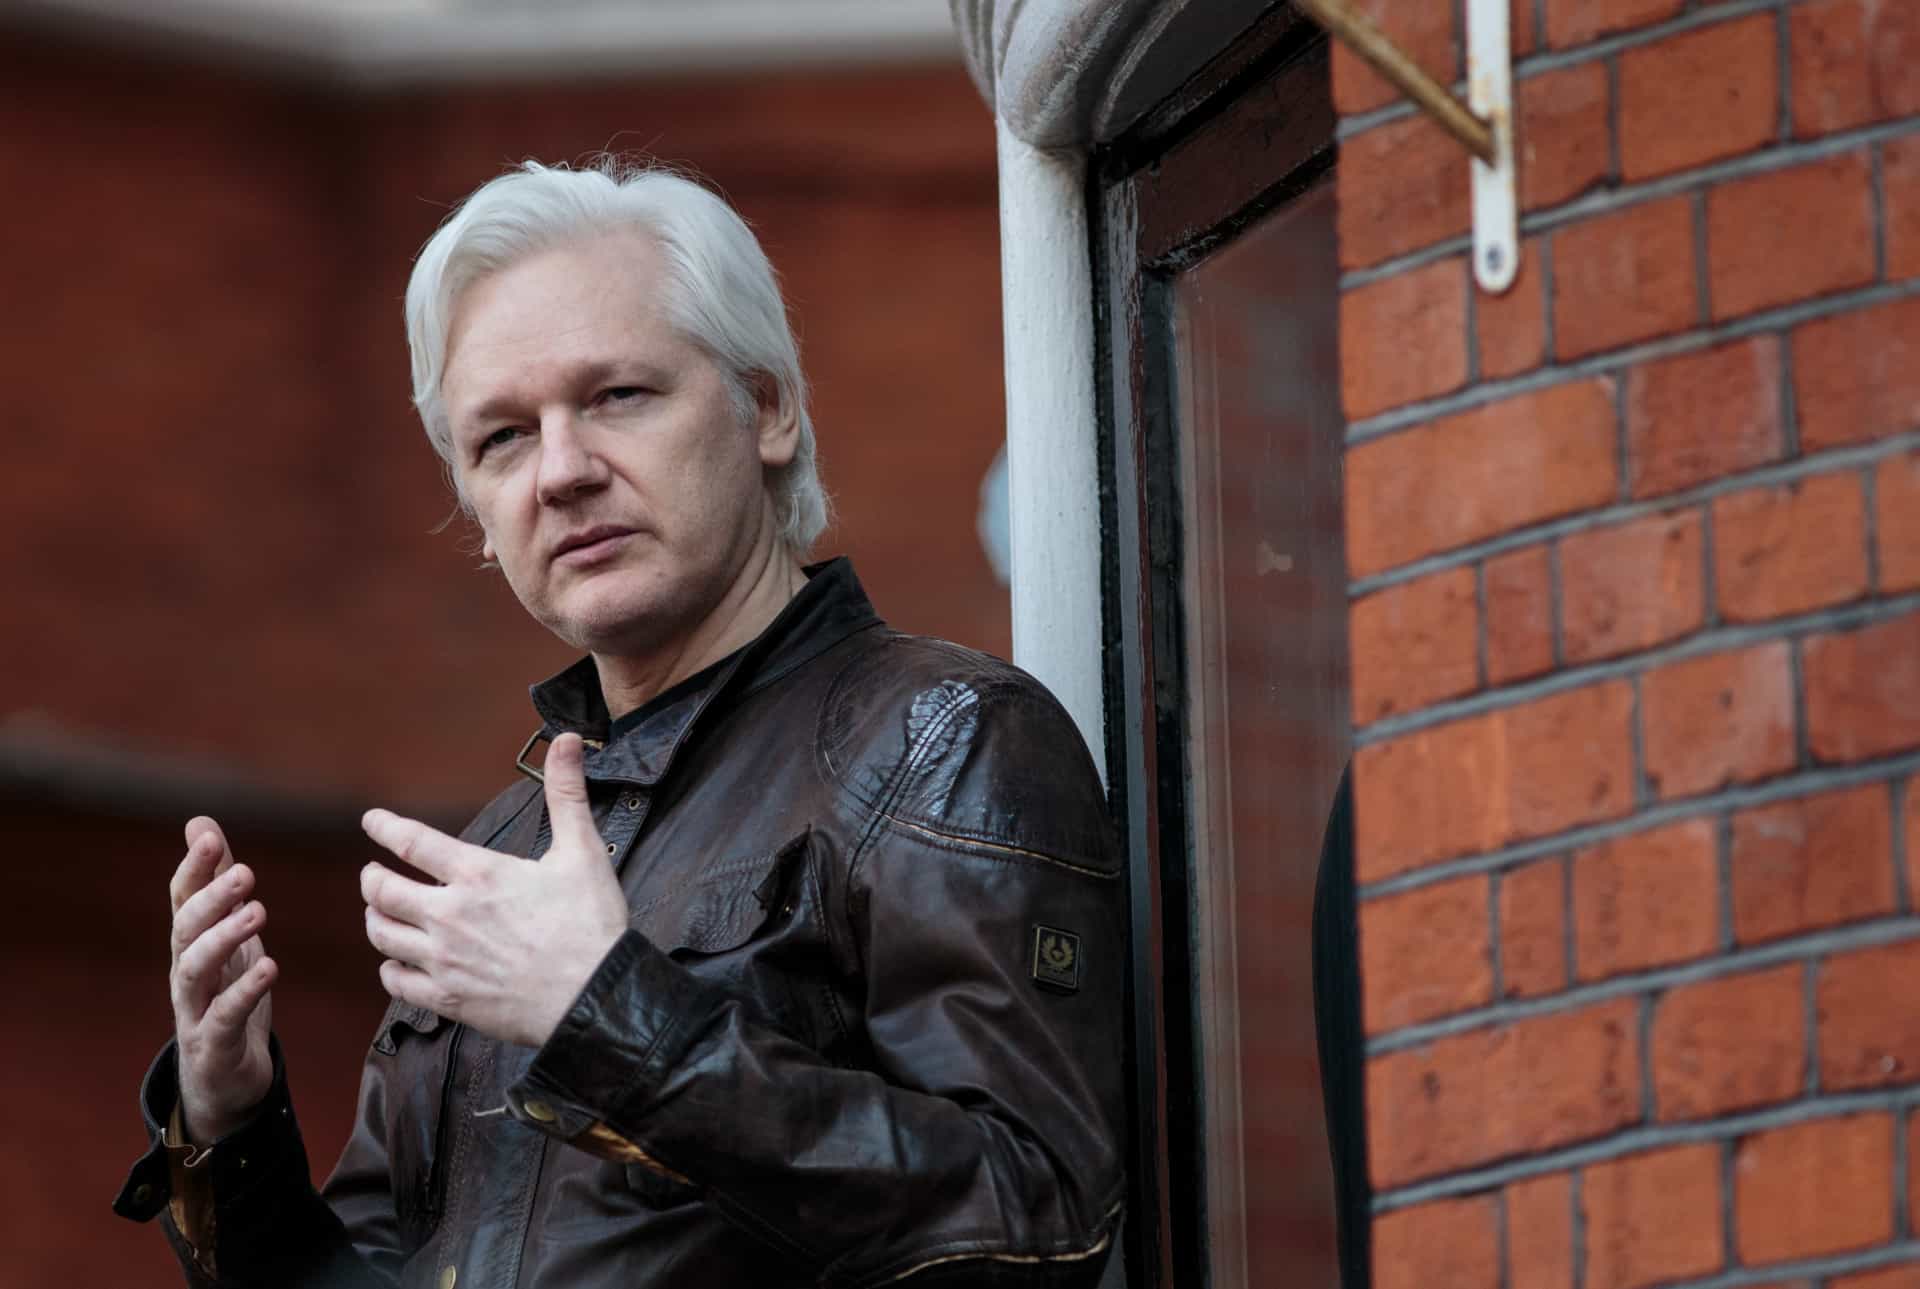 'Julian Assange: The Unauthorized Biography' was originally an authorized publication as Assange fully cooperated with Andrew O’Hagan, but he later claimed it was "too personal."